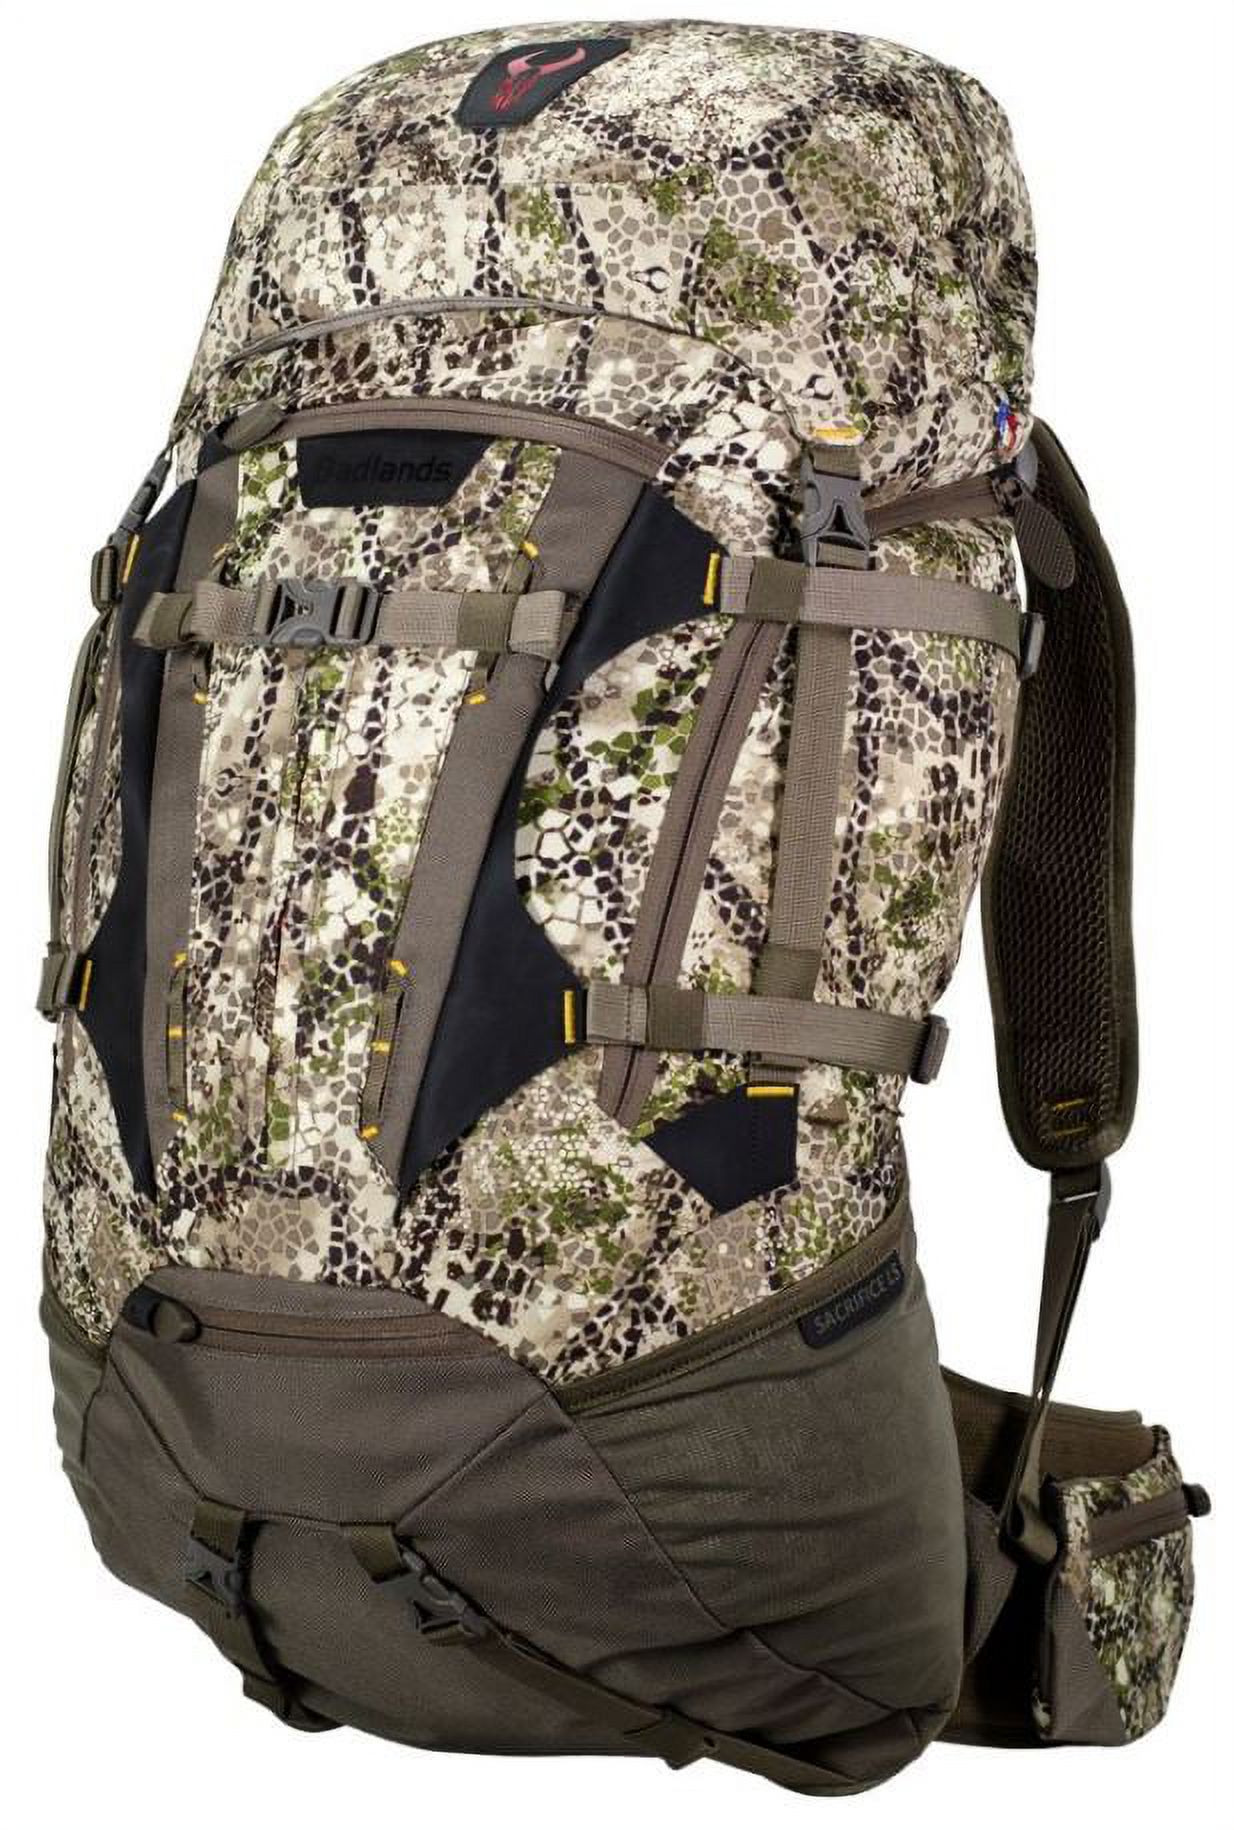 Badlands "Sacrifice LS" Ultra-Light Hypervent Hunting Pack, Approach Camo - image 1 of 3